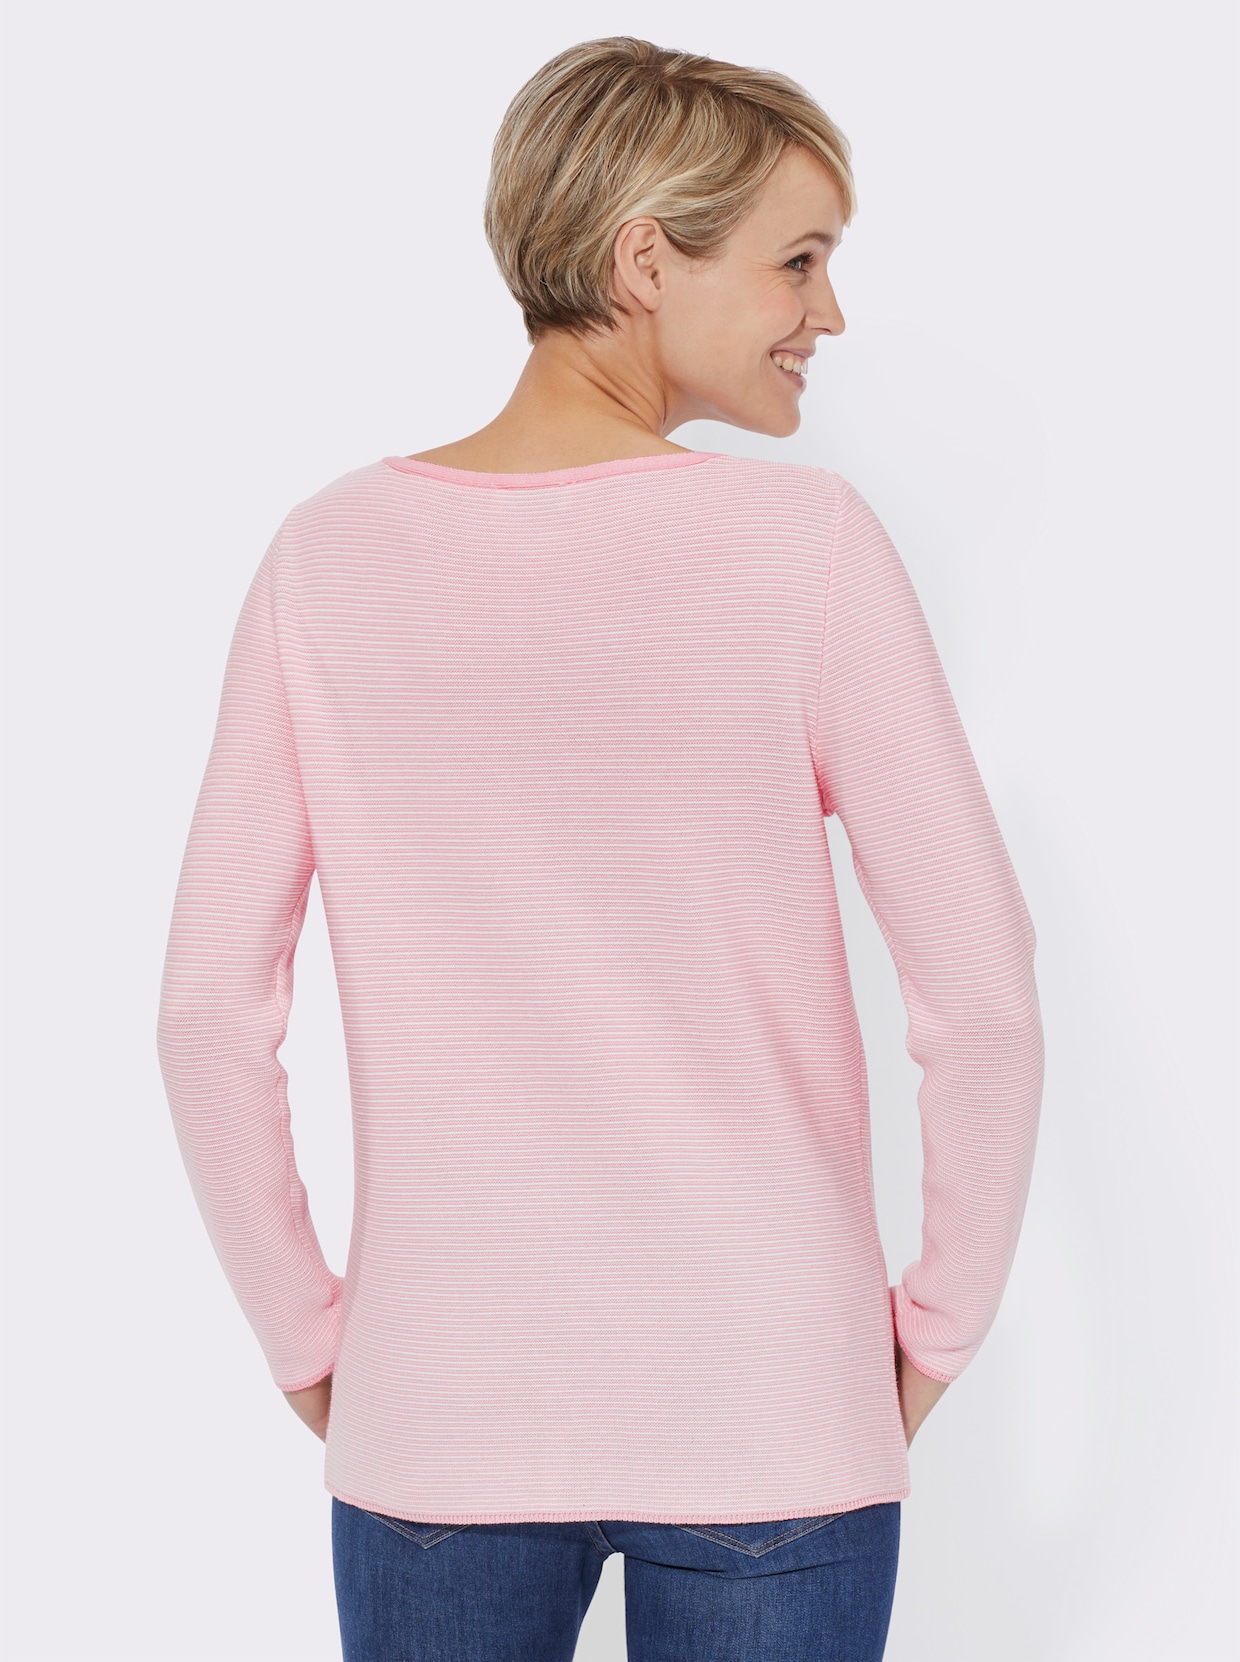 Pull à manches longues - rose clair à rayures